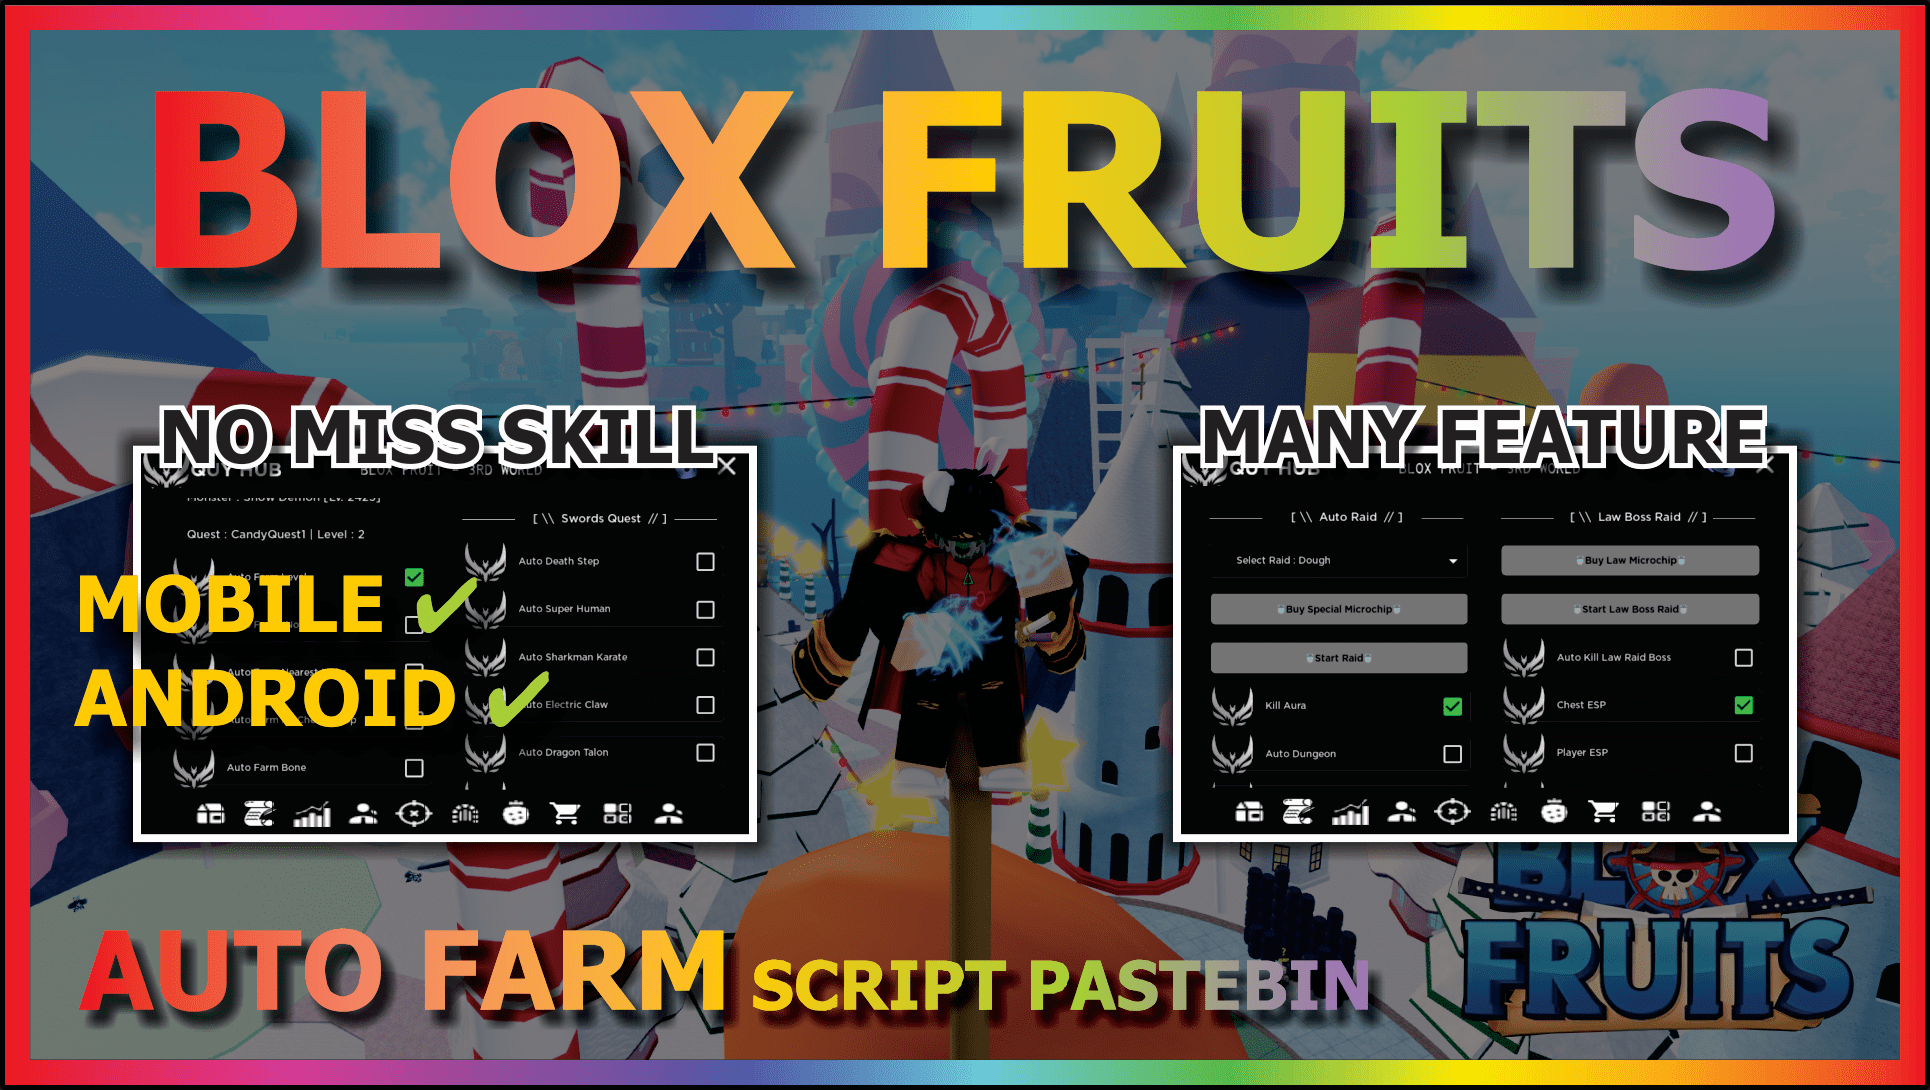 You are currently viewing BLOX FRUITS (QUY)